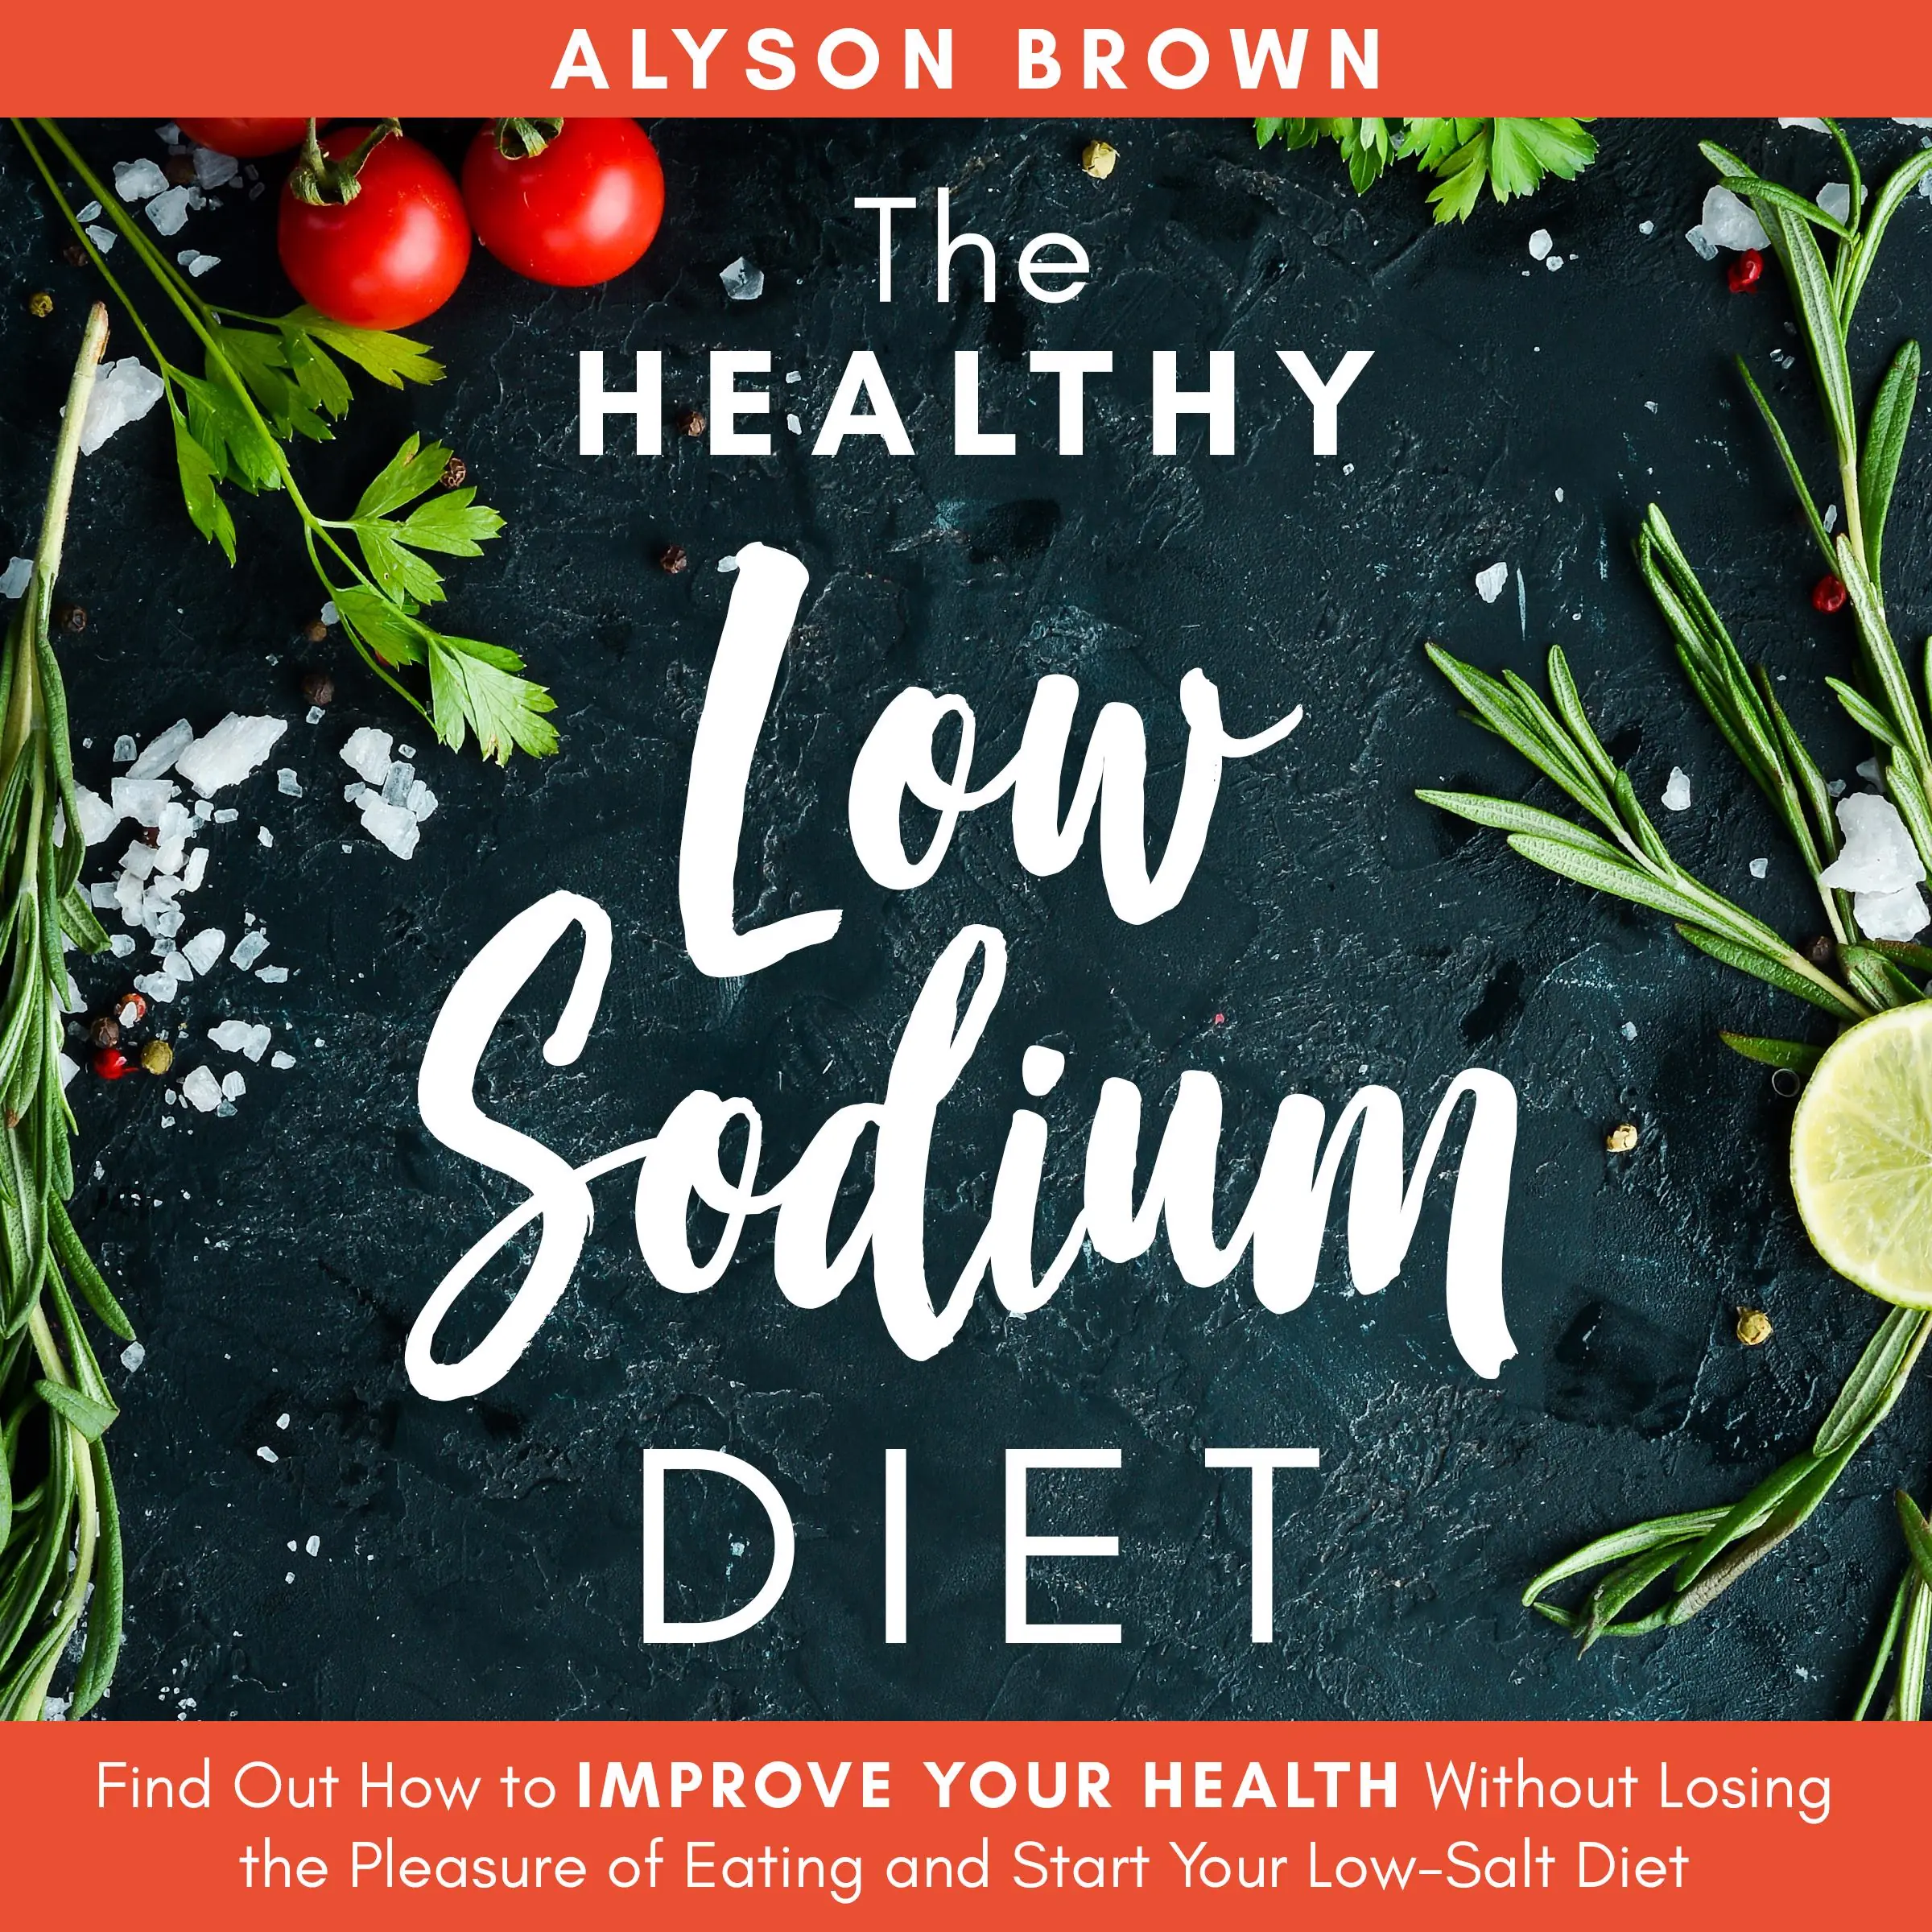 The Healthy Low Sodium Diet: Find out How to Improve Your Health Without Losing the Pleasure of Eating and Start Your Low-Salt Diet Audiobook by Alyson Brown